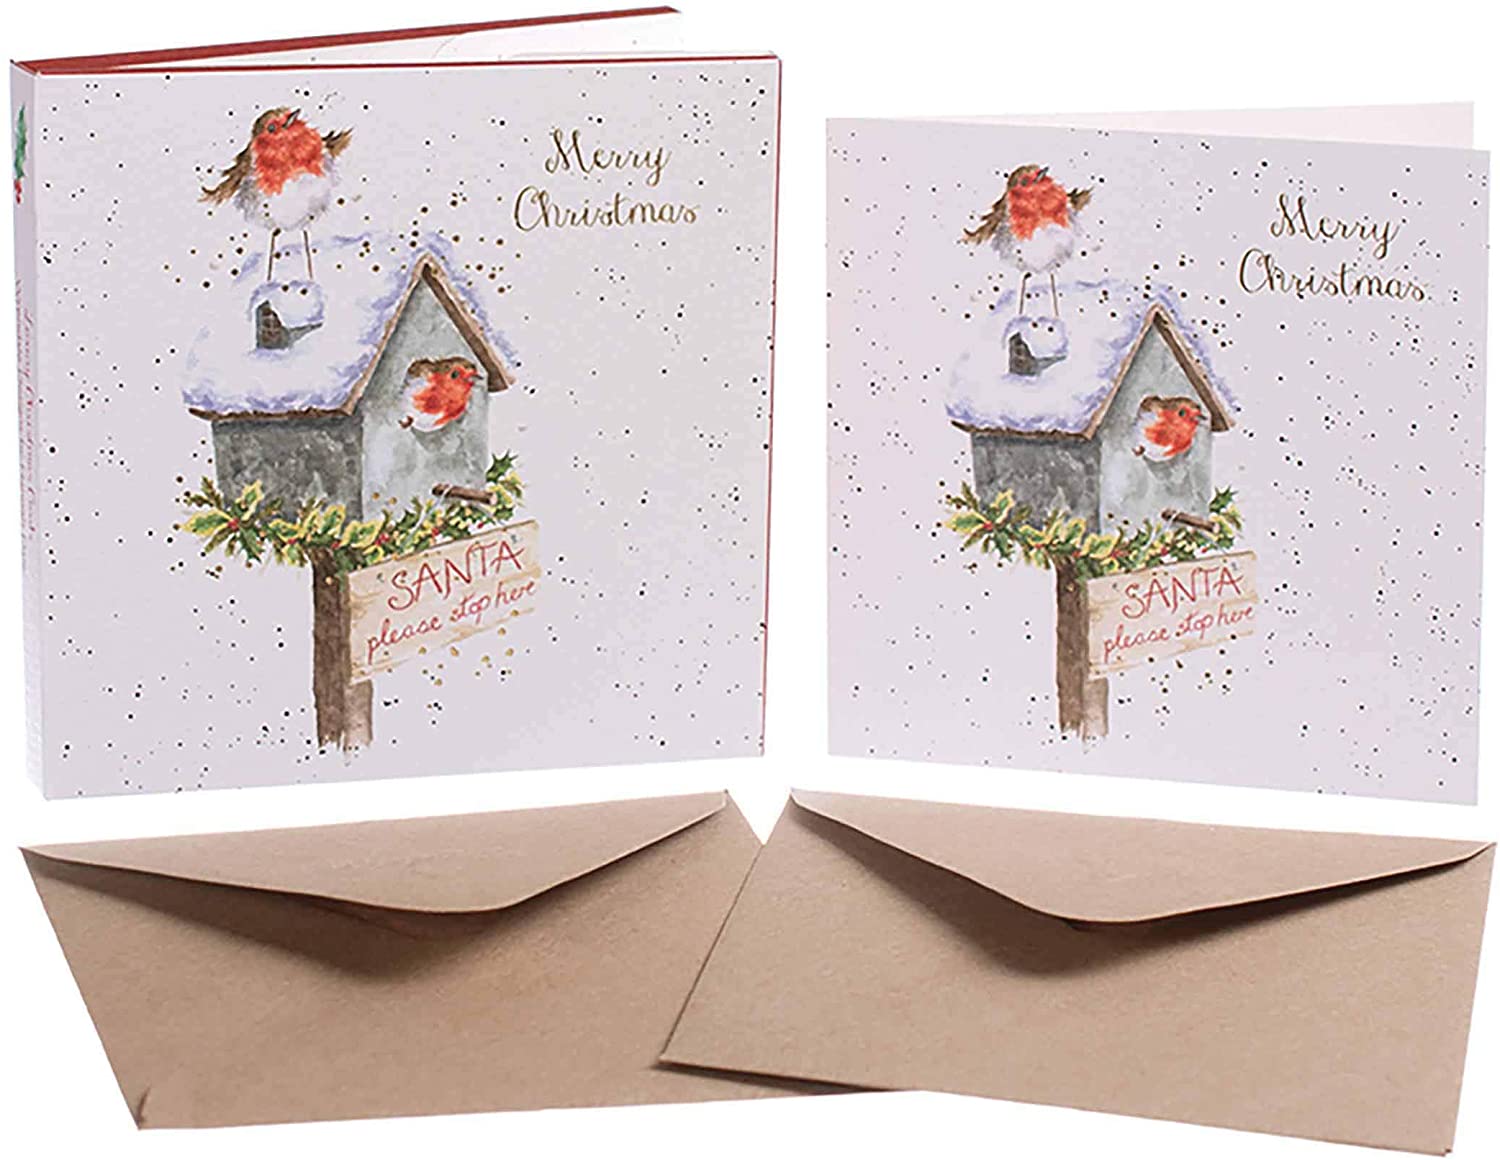 Wrendale Designs Please Stop Here Christmas Card Set